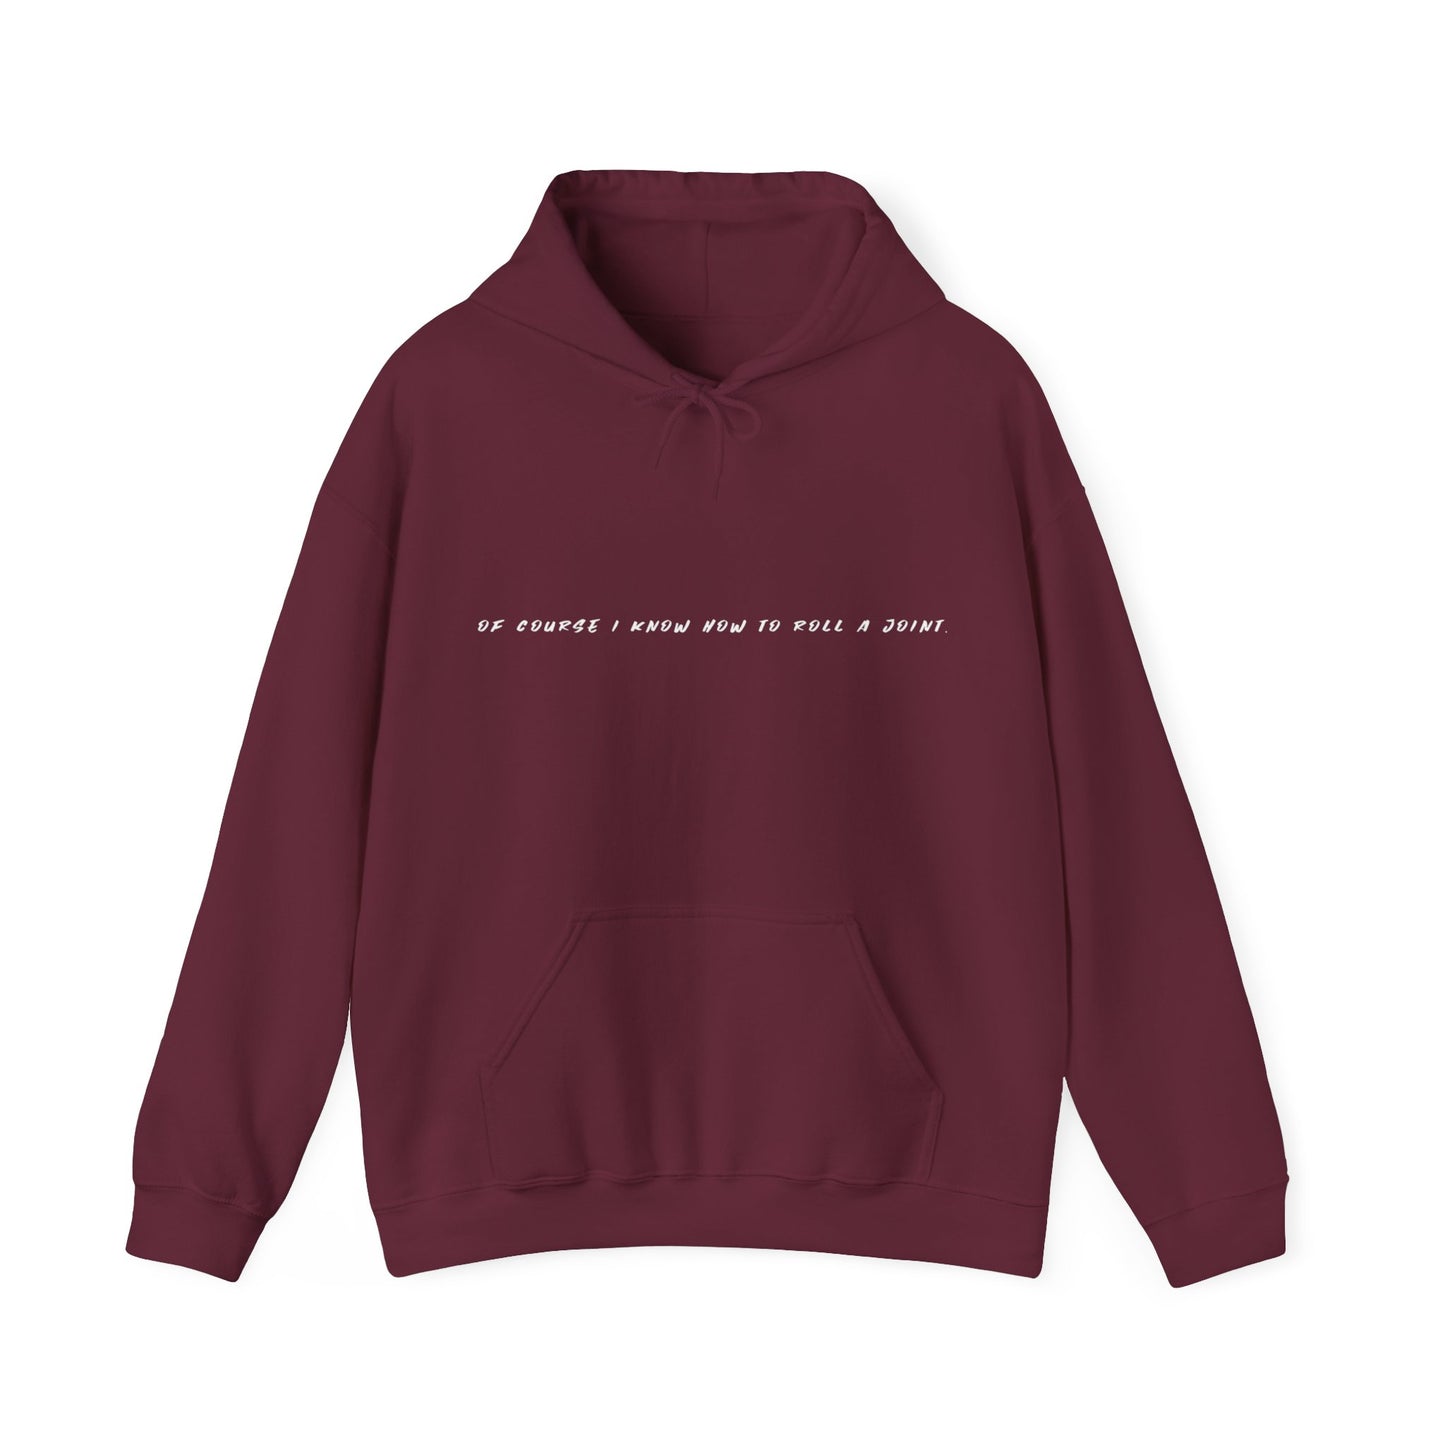 Of Course I know How To Roll A Joint Unisex Hooded Sweatshirt